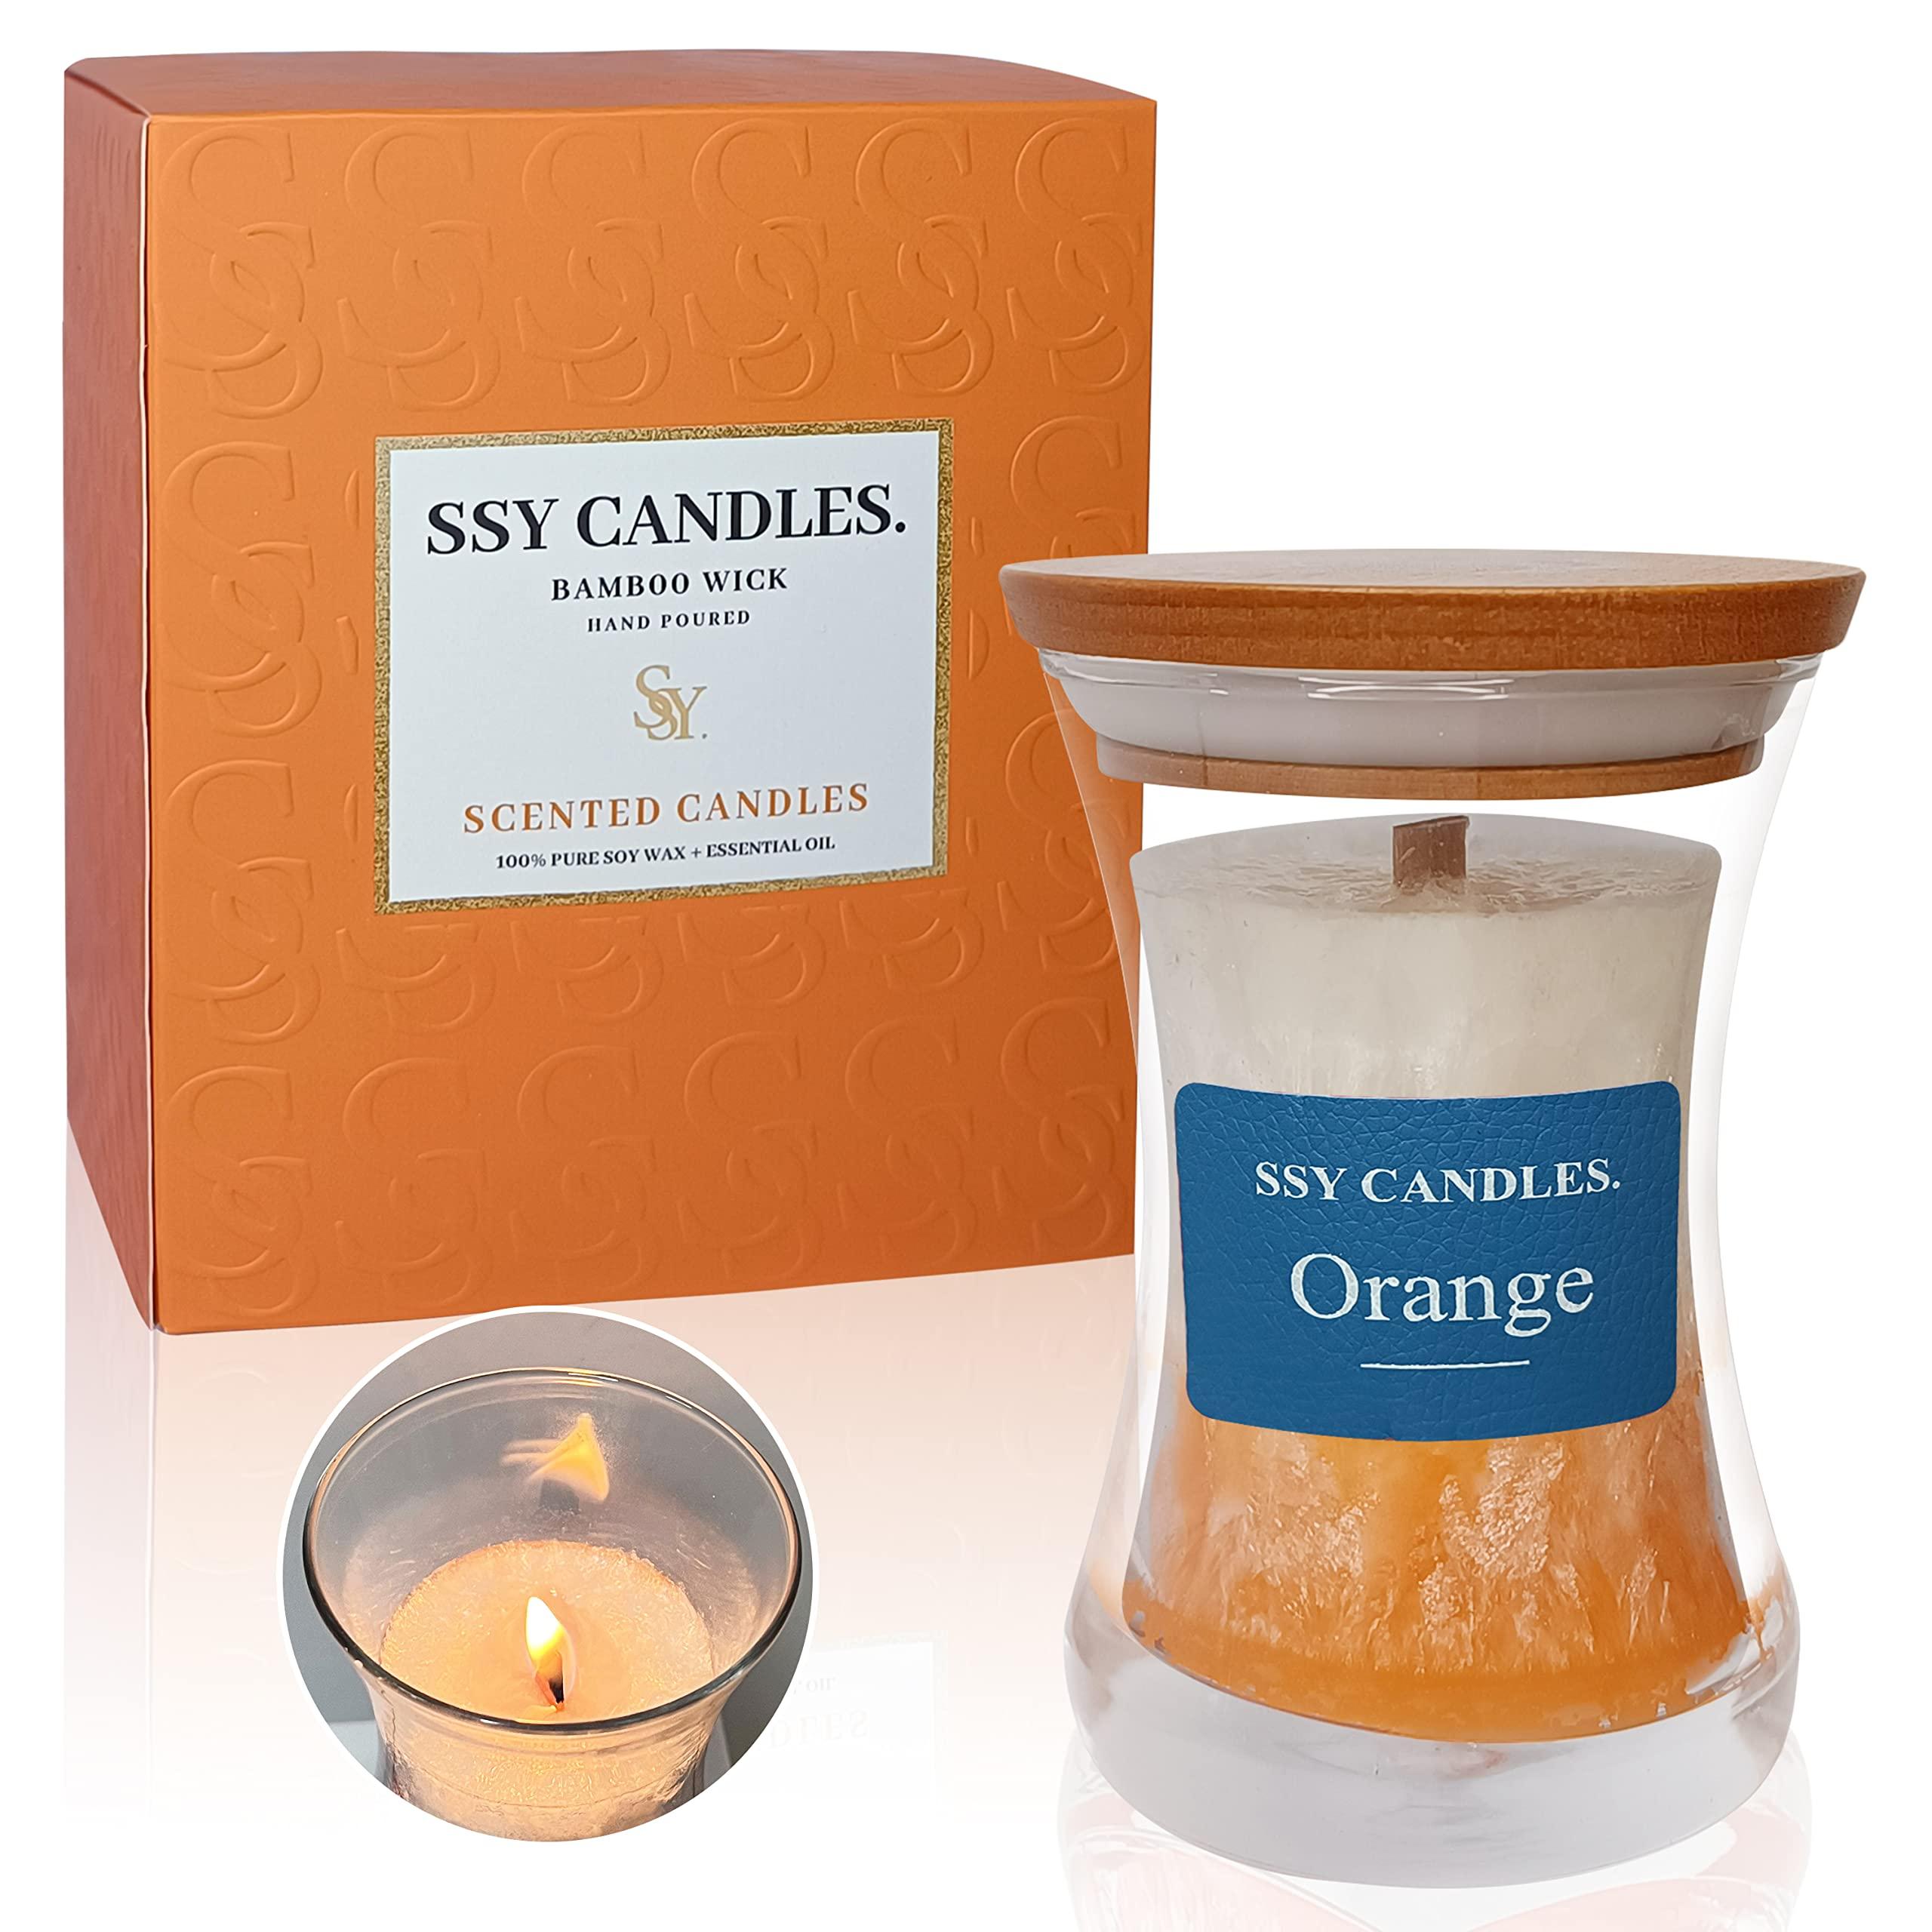 Experience Relaxation with Our Scented Jar Candle - 100% Natural Soy Wax, Burns up to 45 Hours, Aromatherapy Candle Gift for Any Occasion